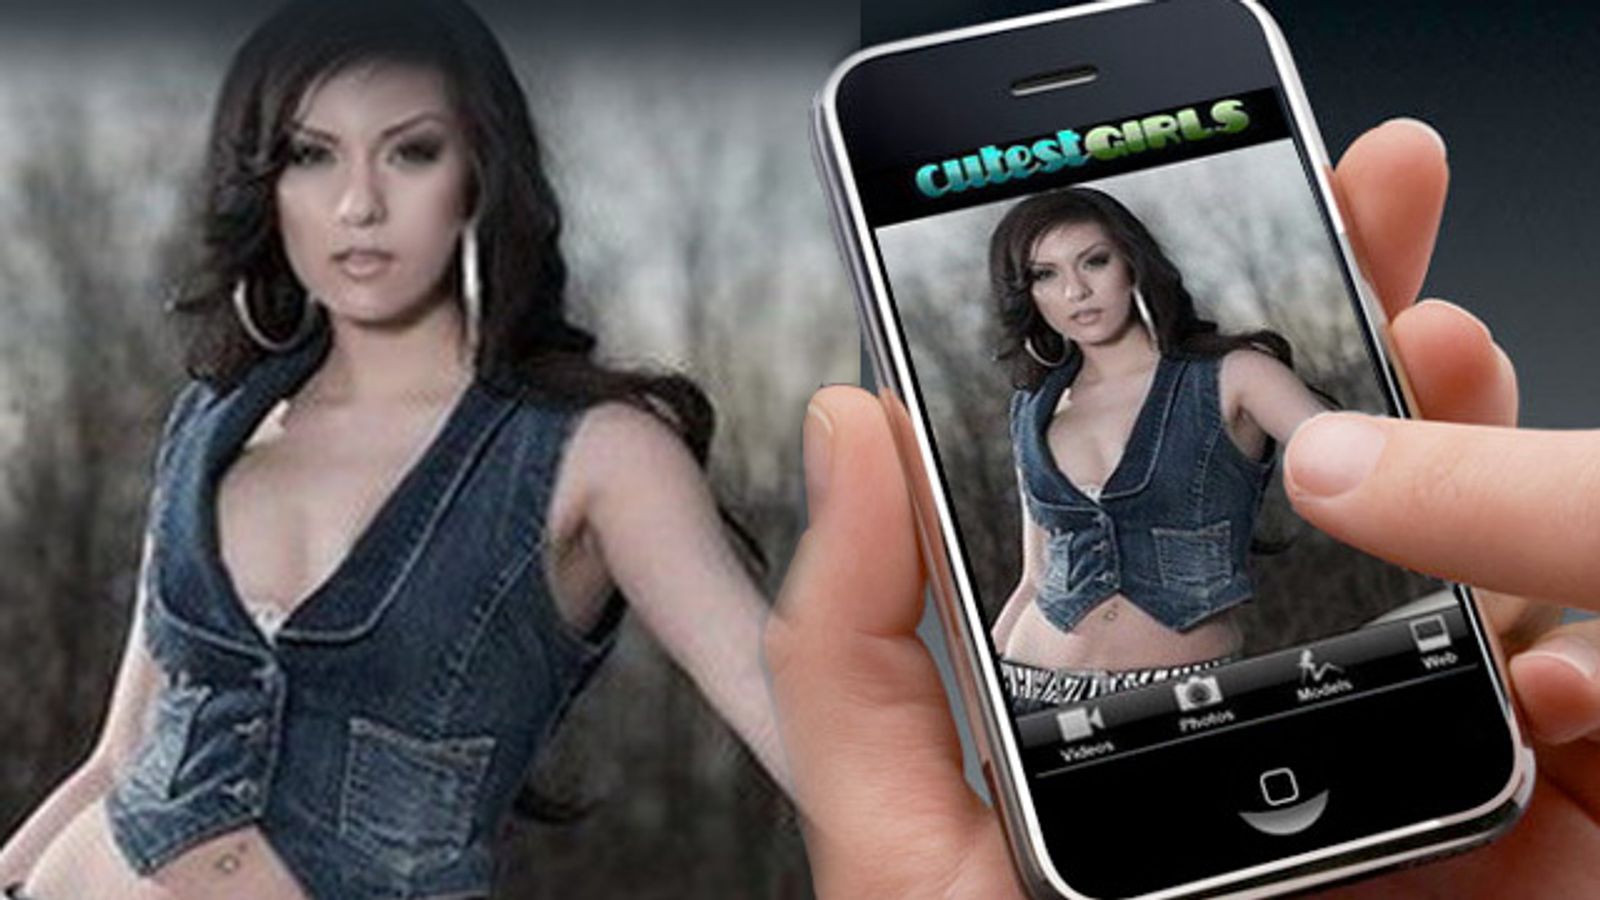 CutestGirls Sexy App Gets Nod from iPhone App Store